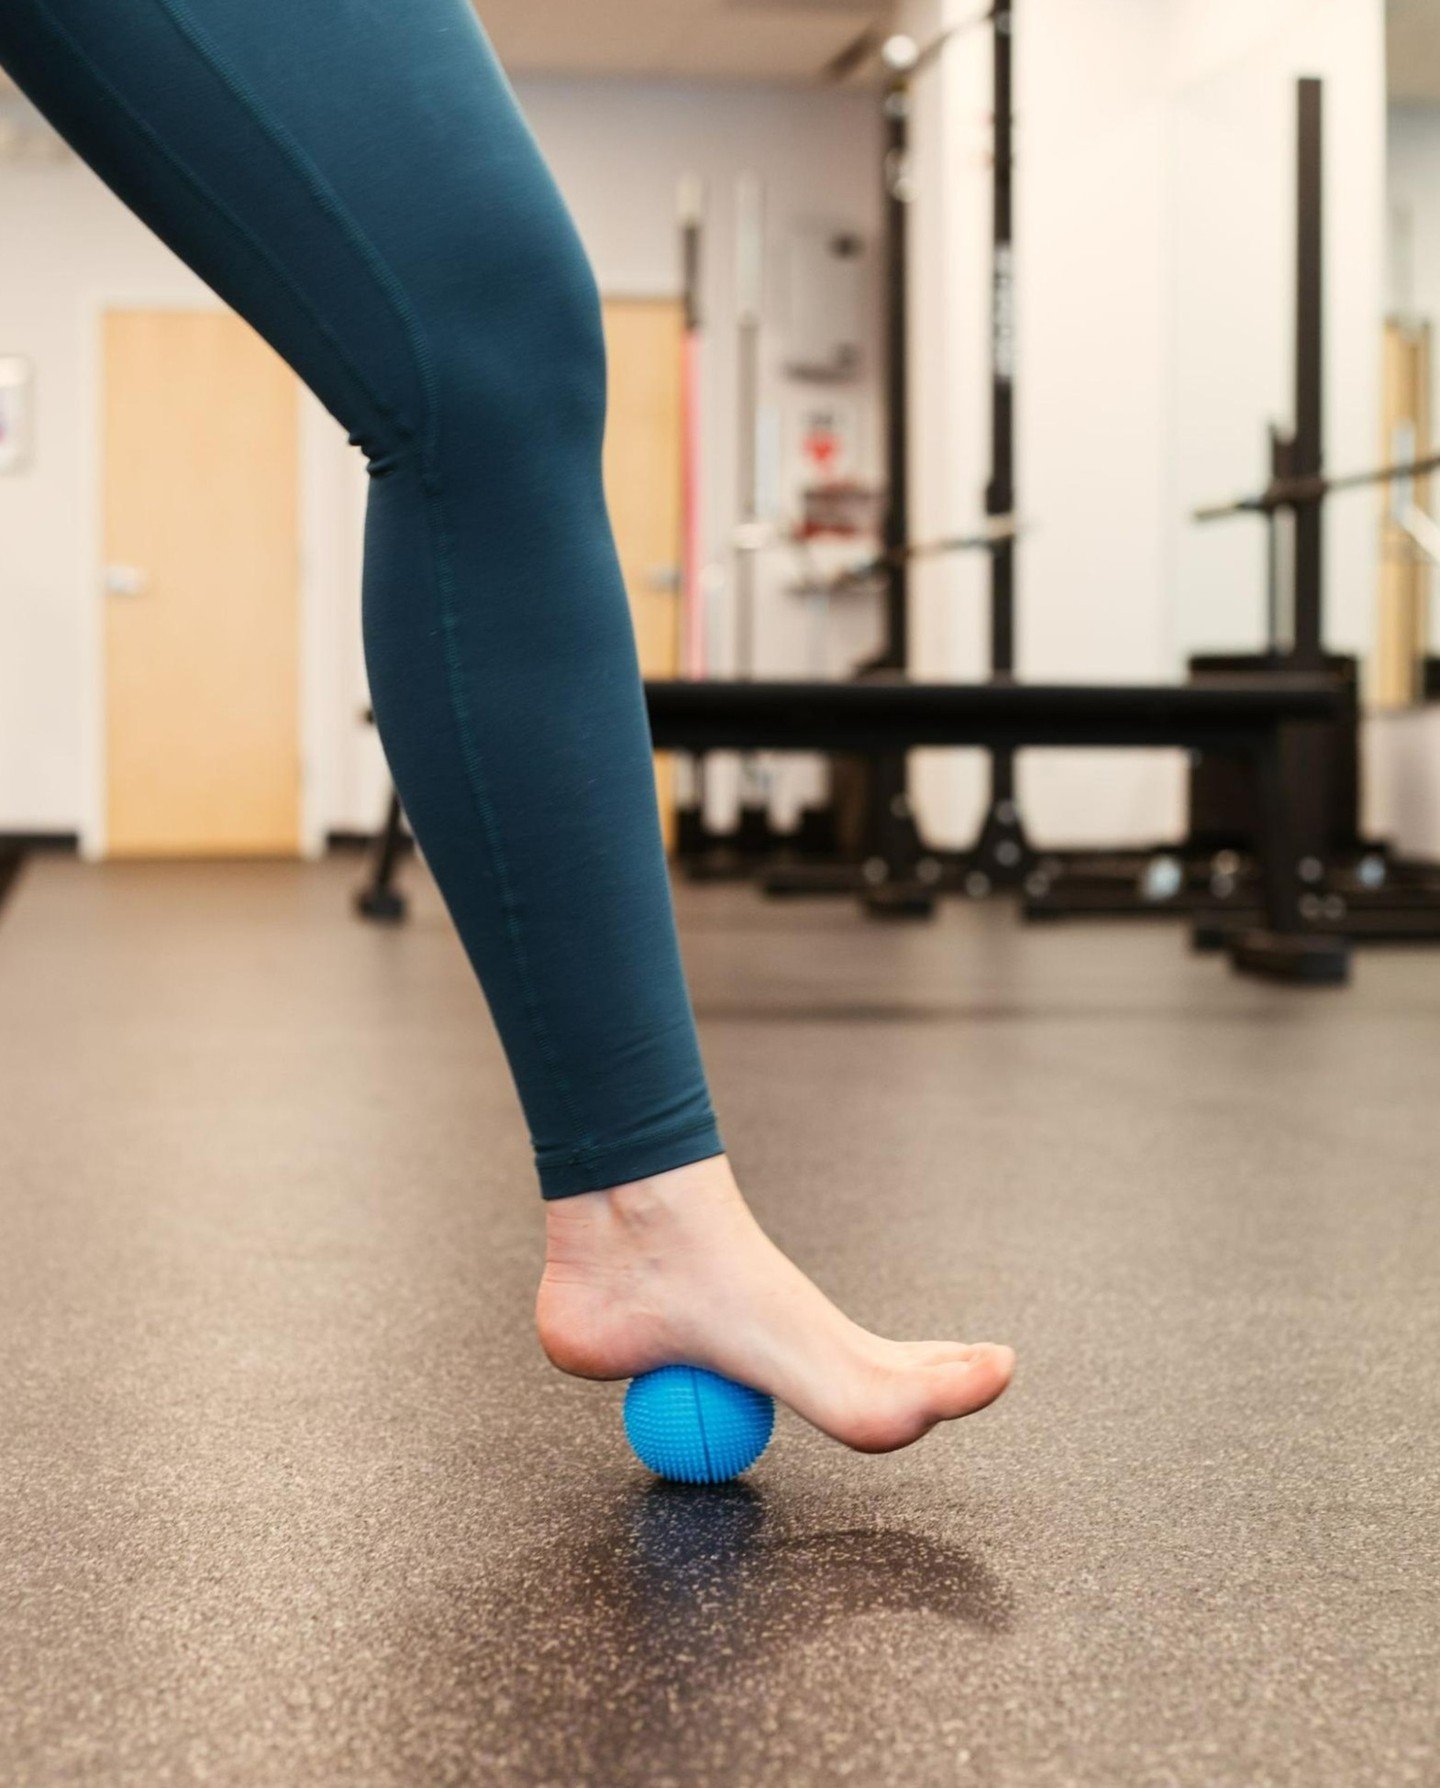 Treat your feet right! Rolling out your feet isn't just a luxury; it's essential for happy, healthy feet. Discover the therapeutic benefits and put your best foot forward! Benefits include:

👣Can help with foot pain, lower back pain, toe pain, and c